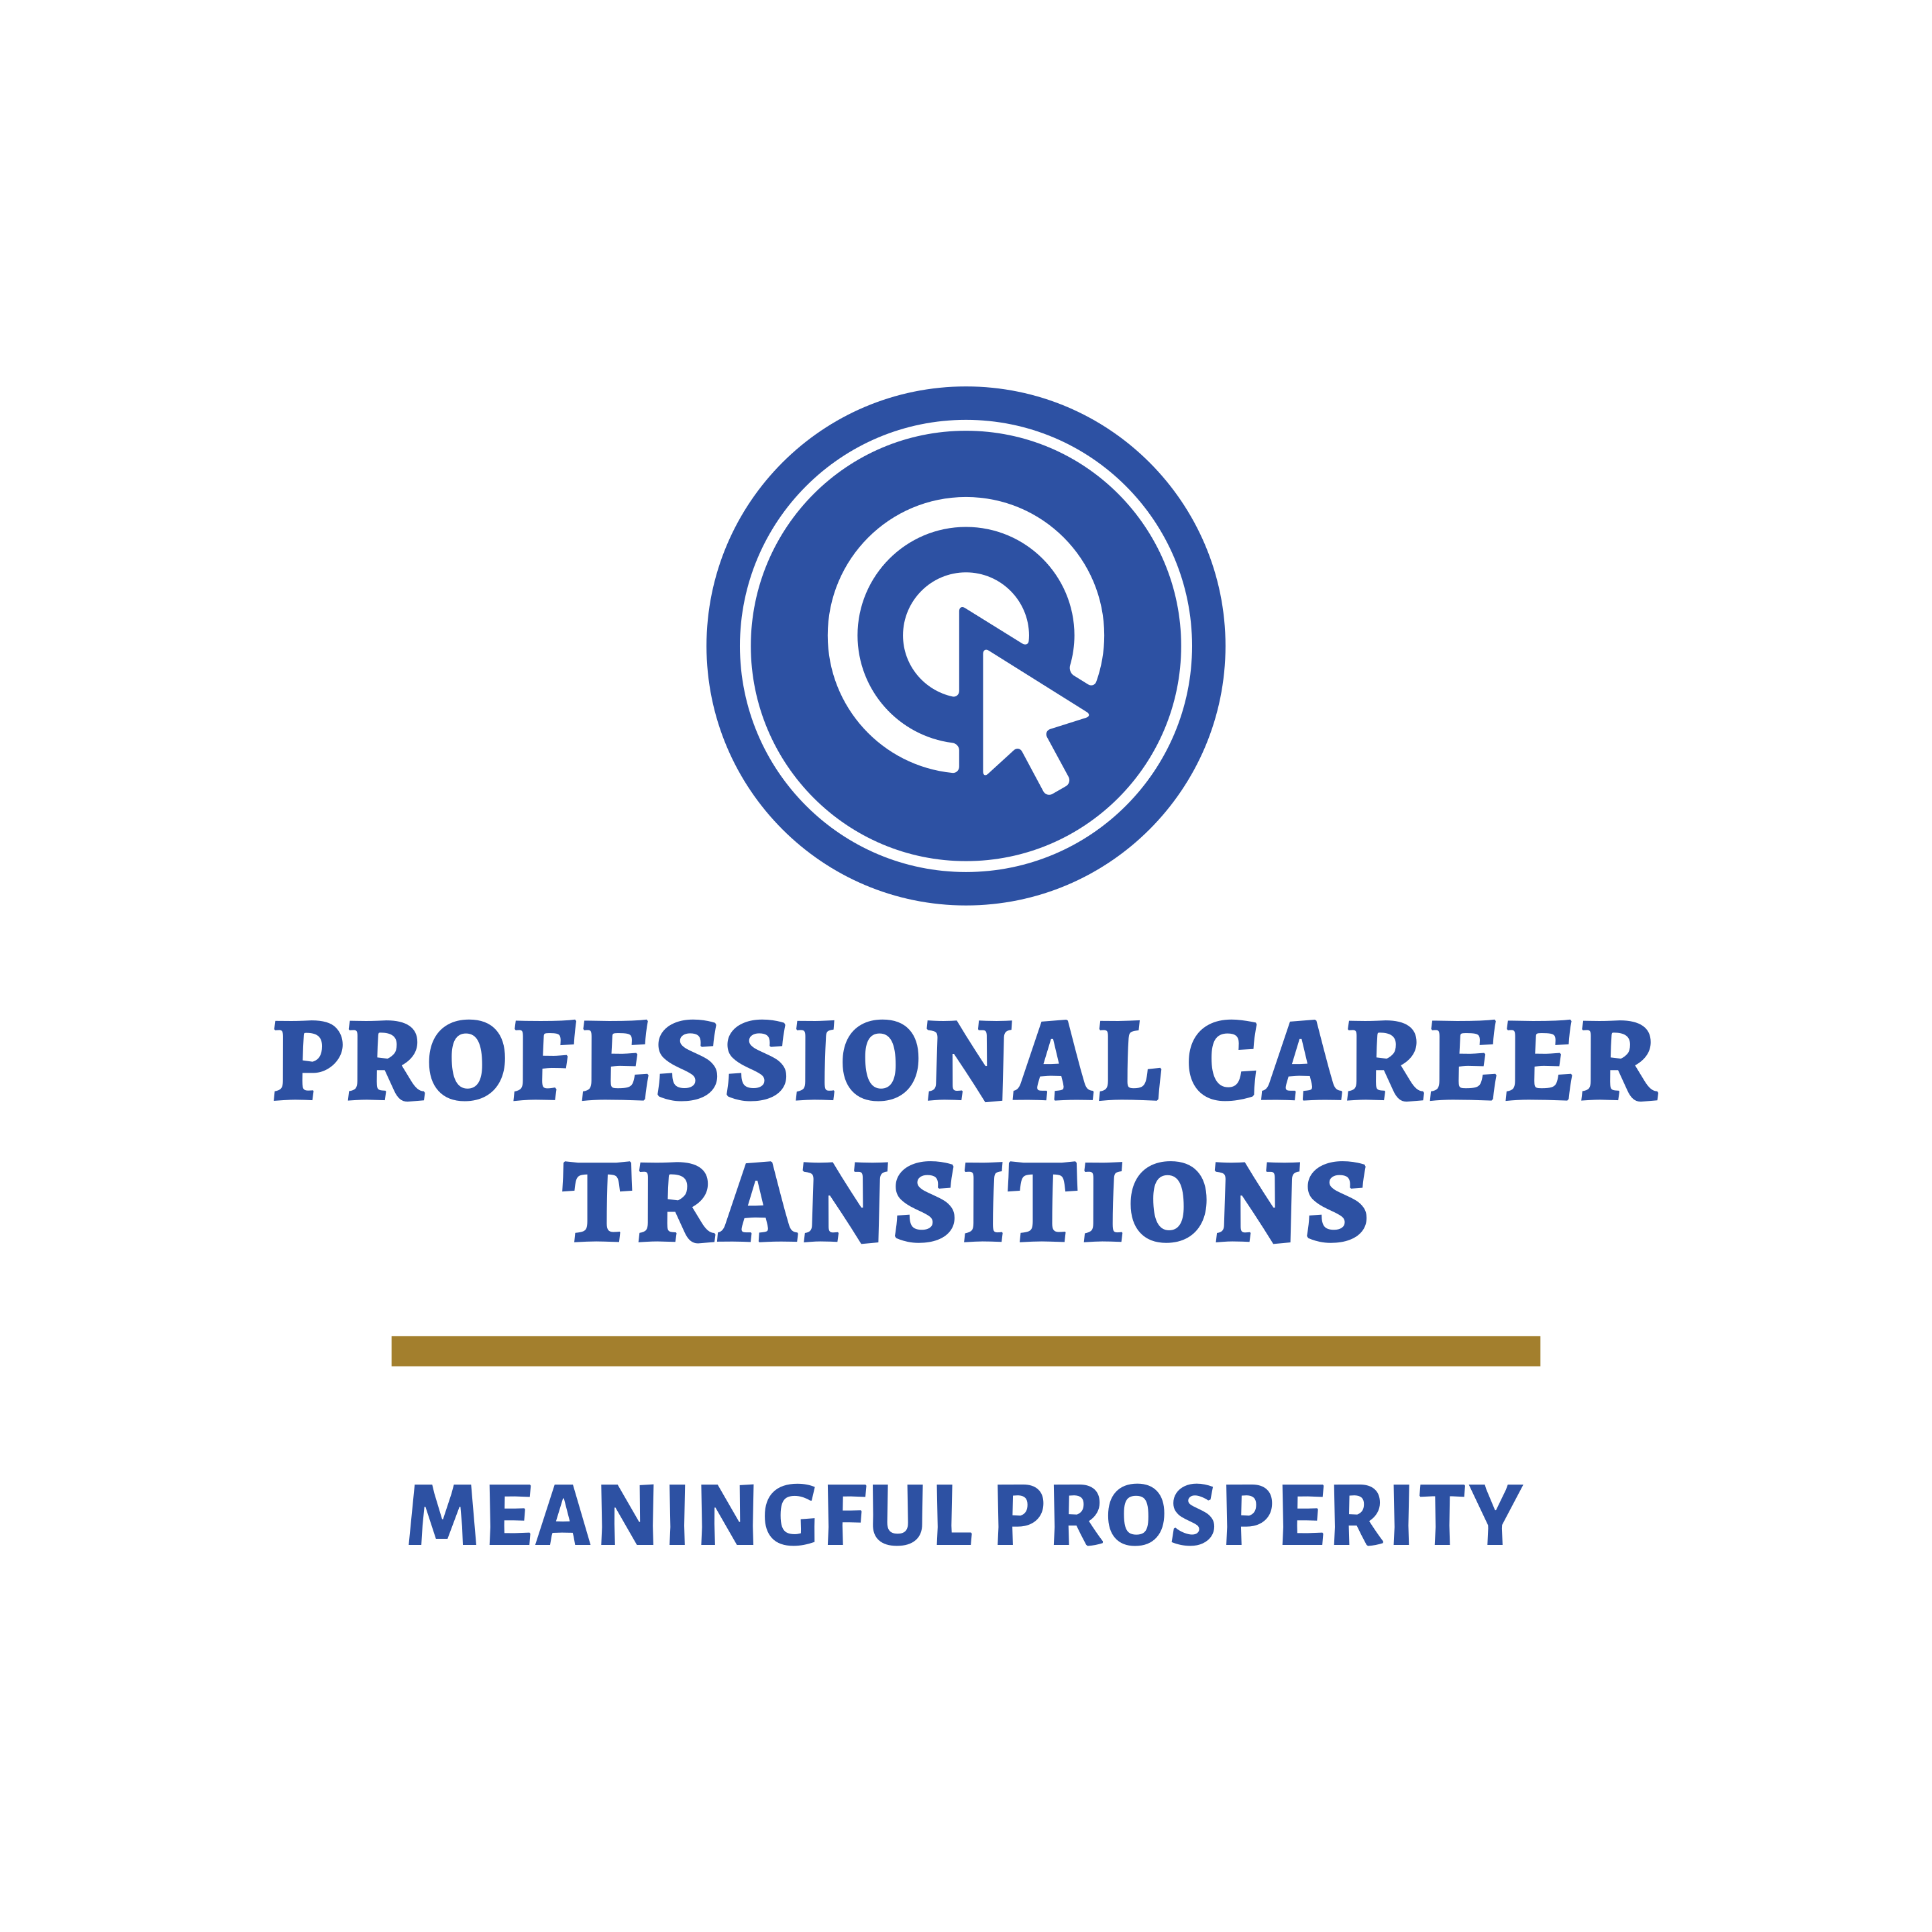 Professional Career Transitions - Meaningful Prosperity Logo